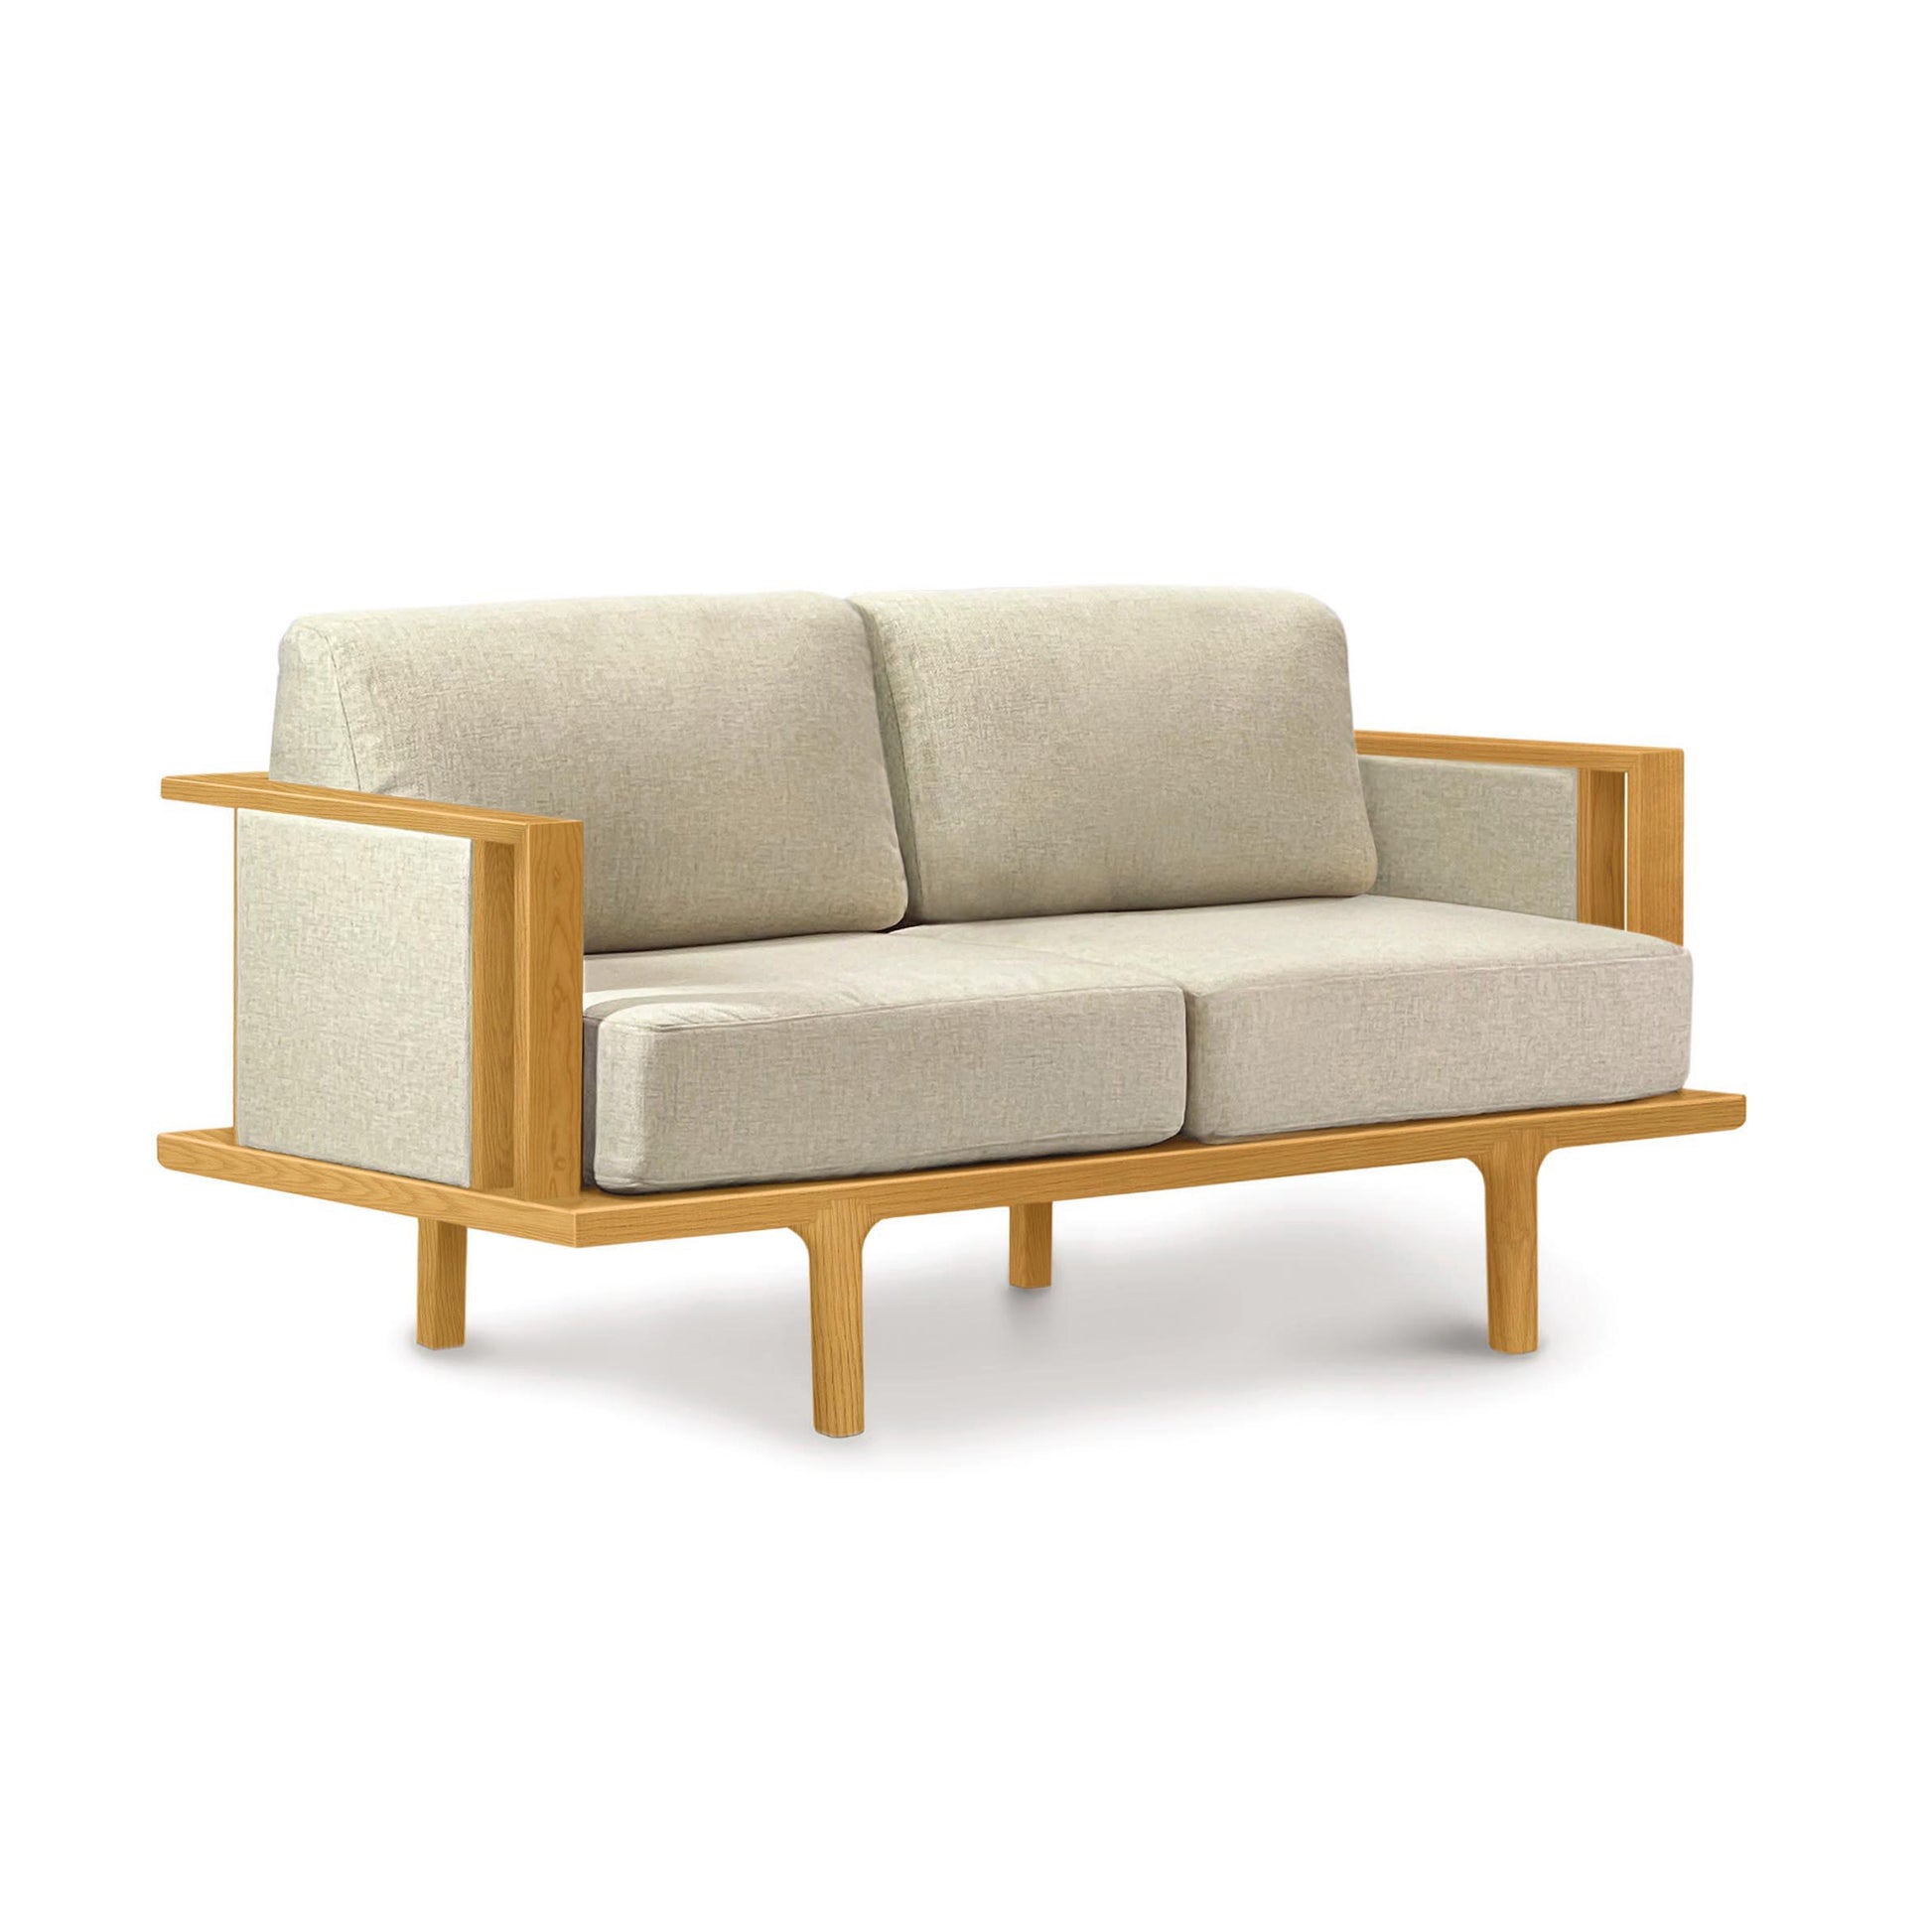 A Copeland Furniture Sierra Cherry Upholstered Loveseat with Upholstered Panels loveseat with wooden armrests and upholstery.